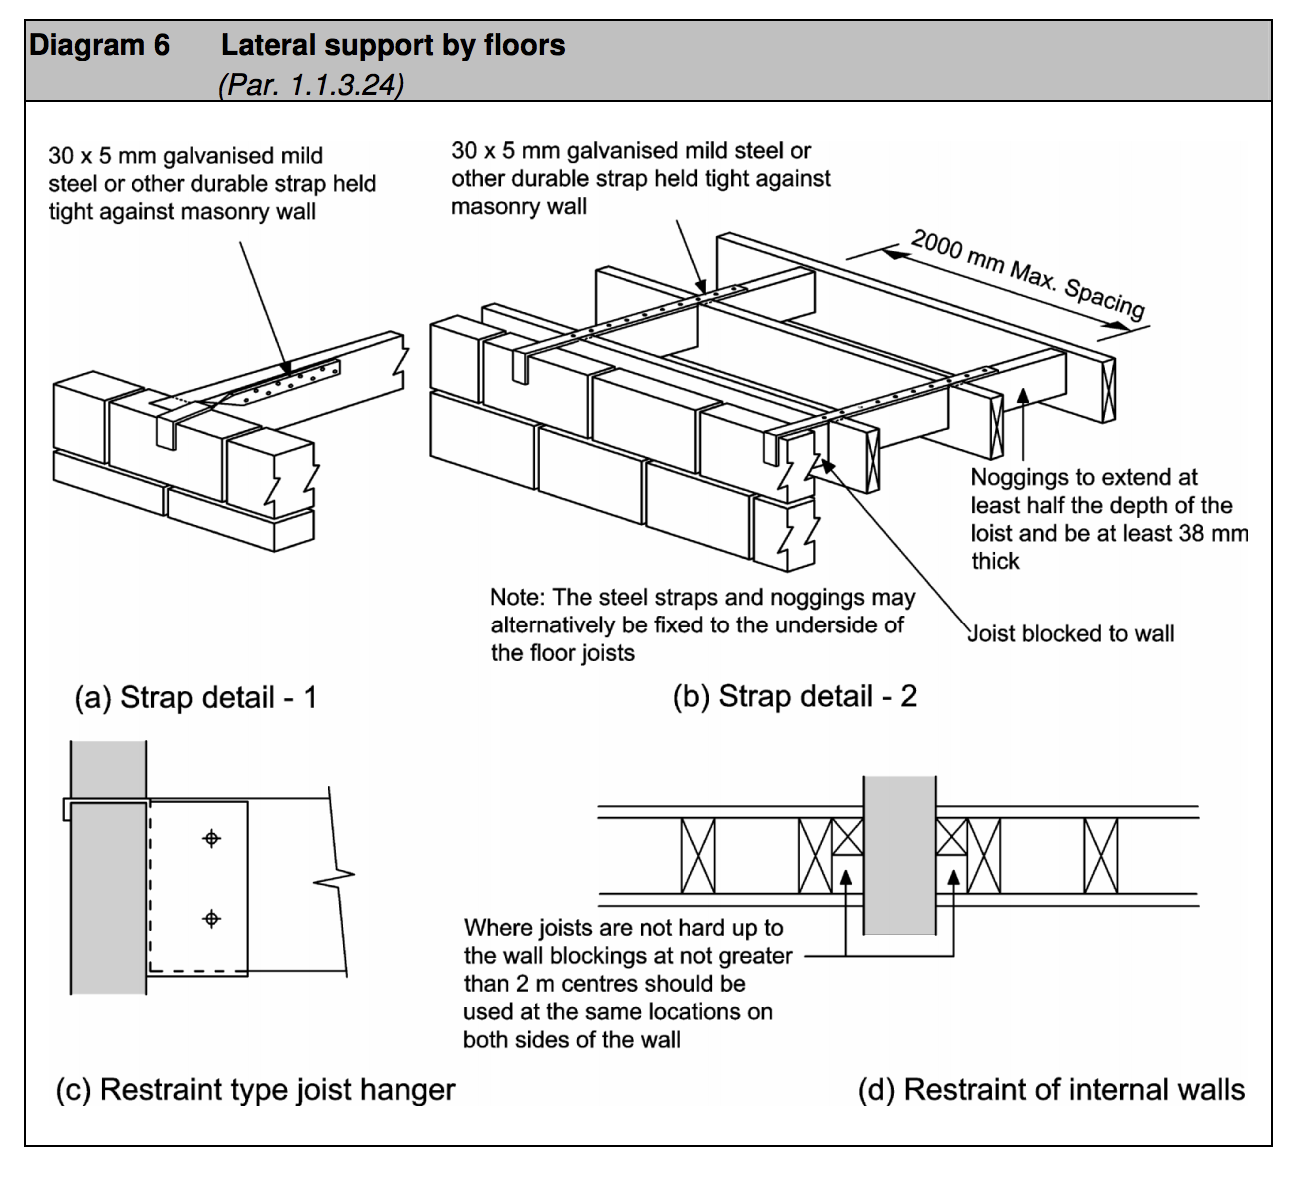 Diagram HA6 - Lateral support by floors  - Extract from TGD A